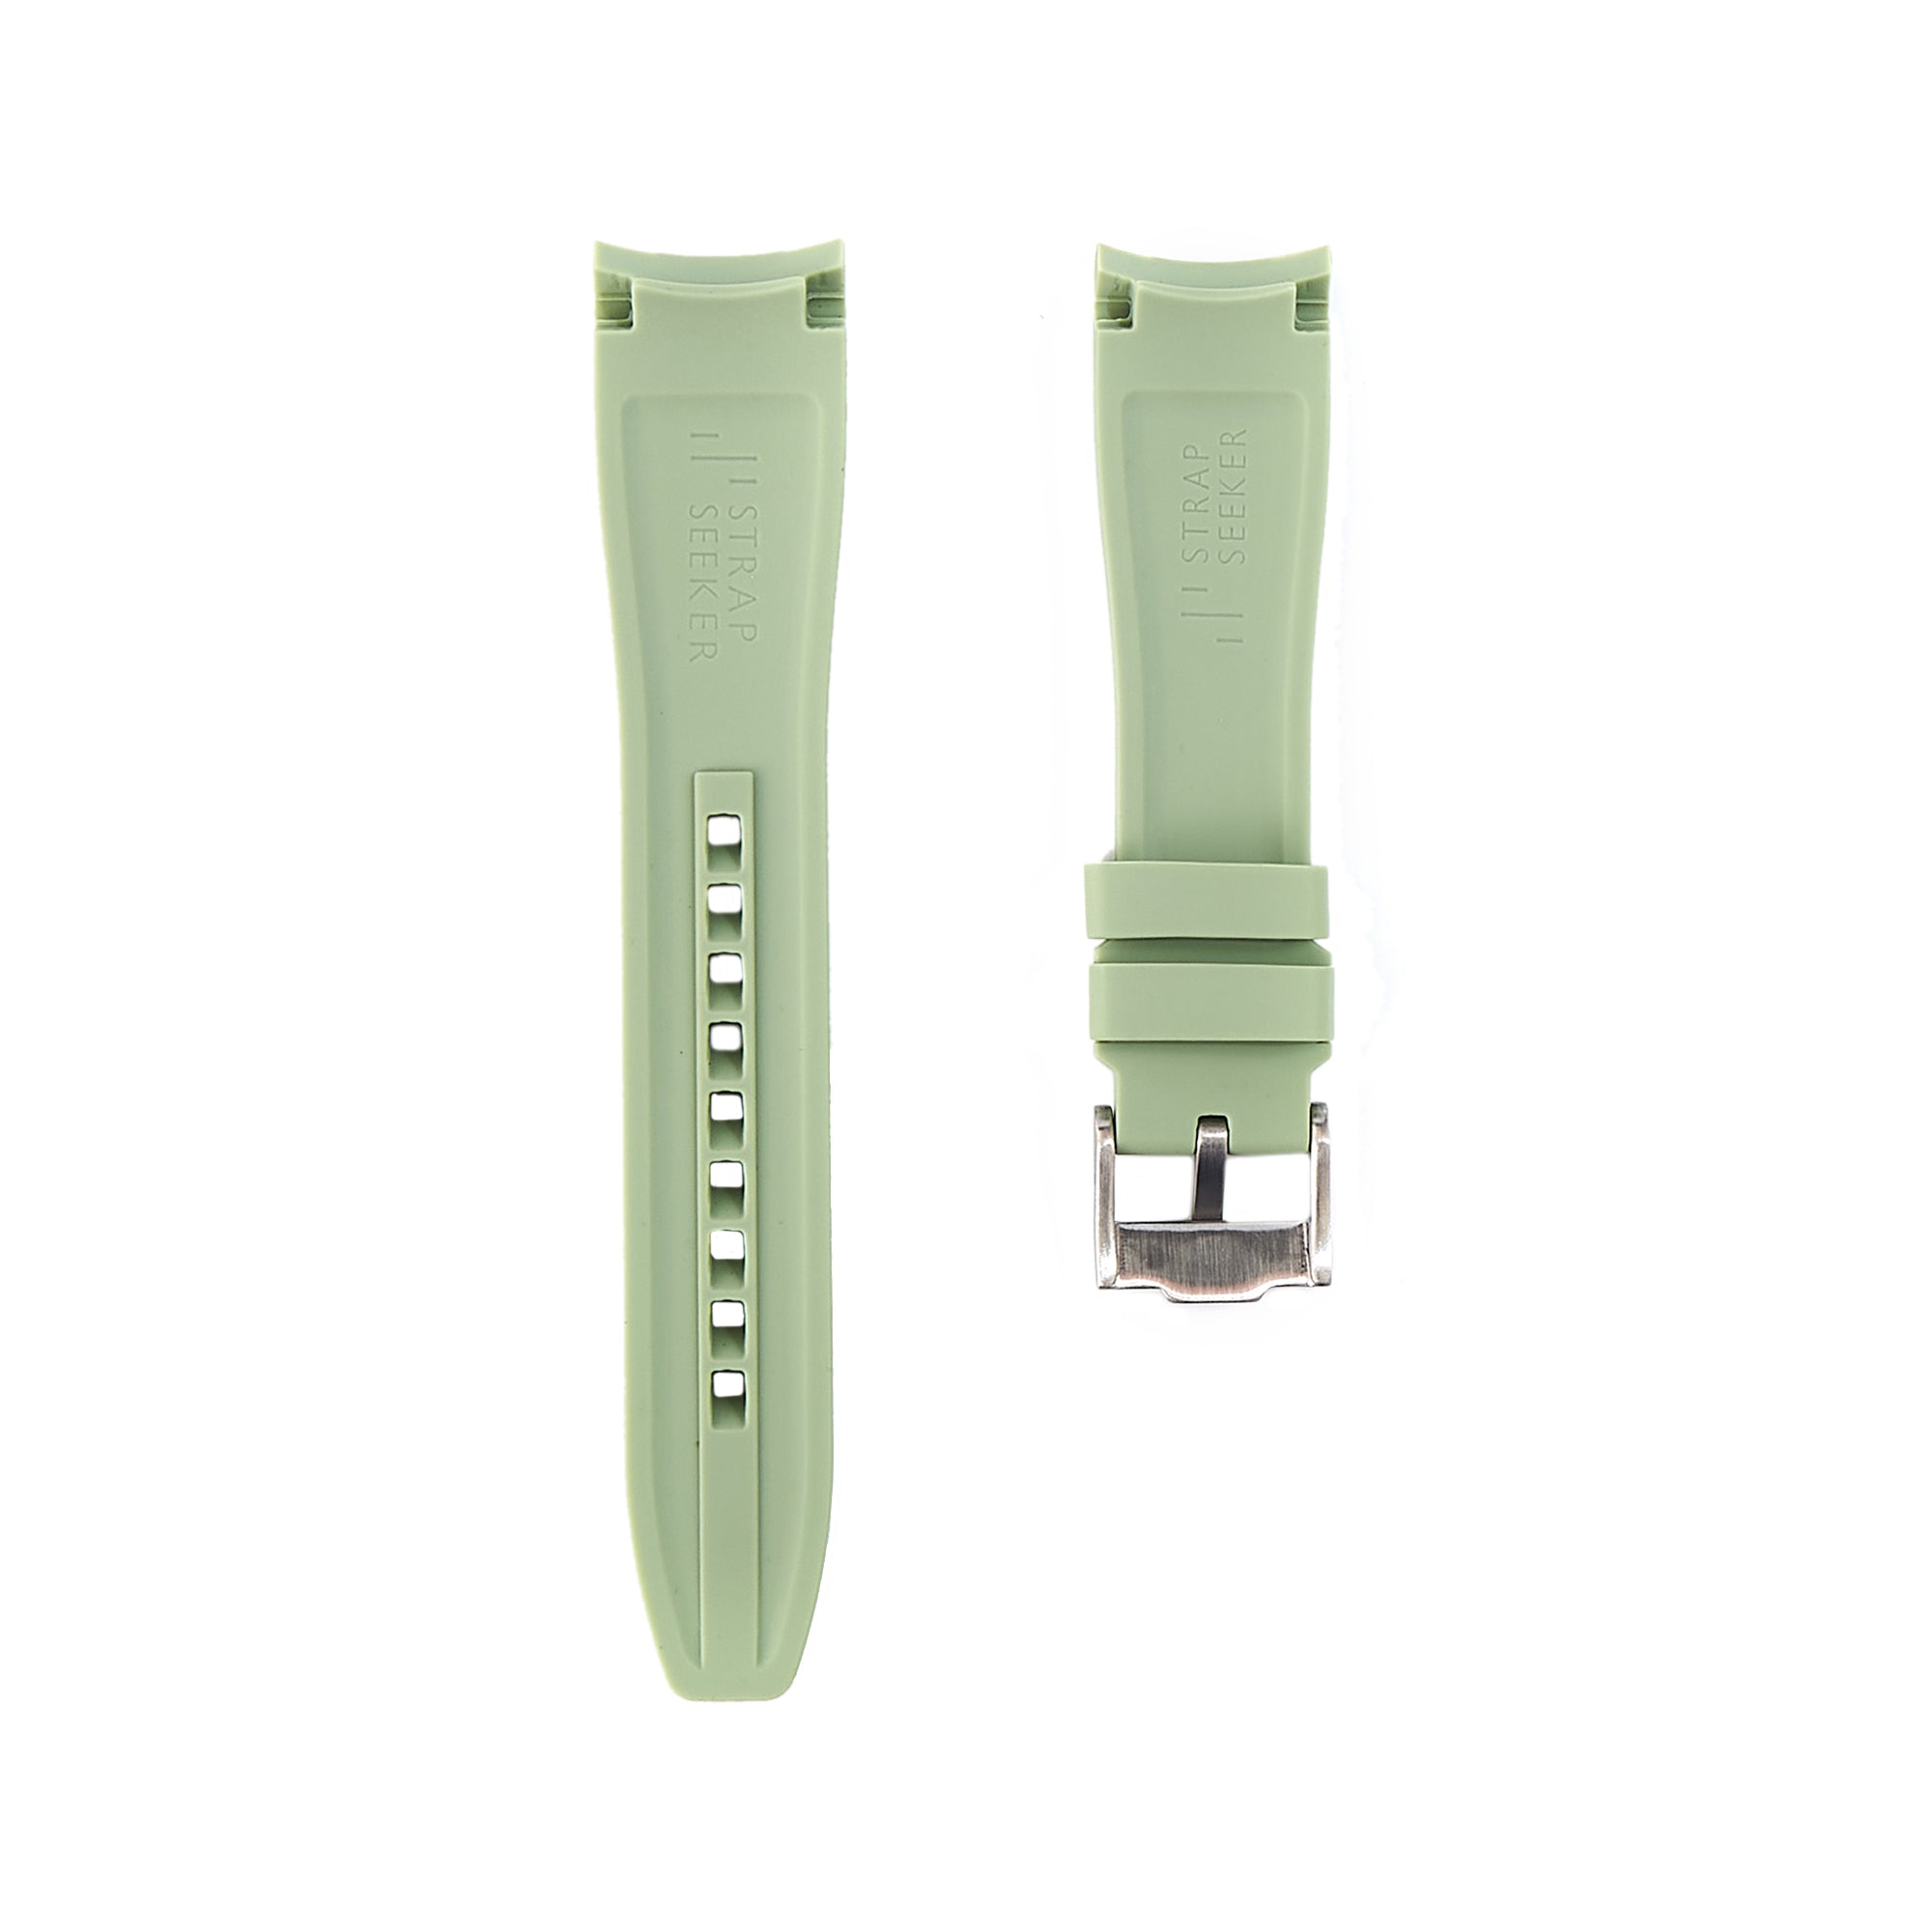 Curved End Soft Silicone Strap - Compatible with Blancpain x Swatch – Light Green (2418) -StrapSeeker